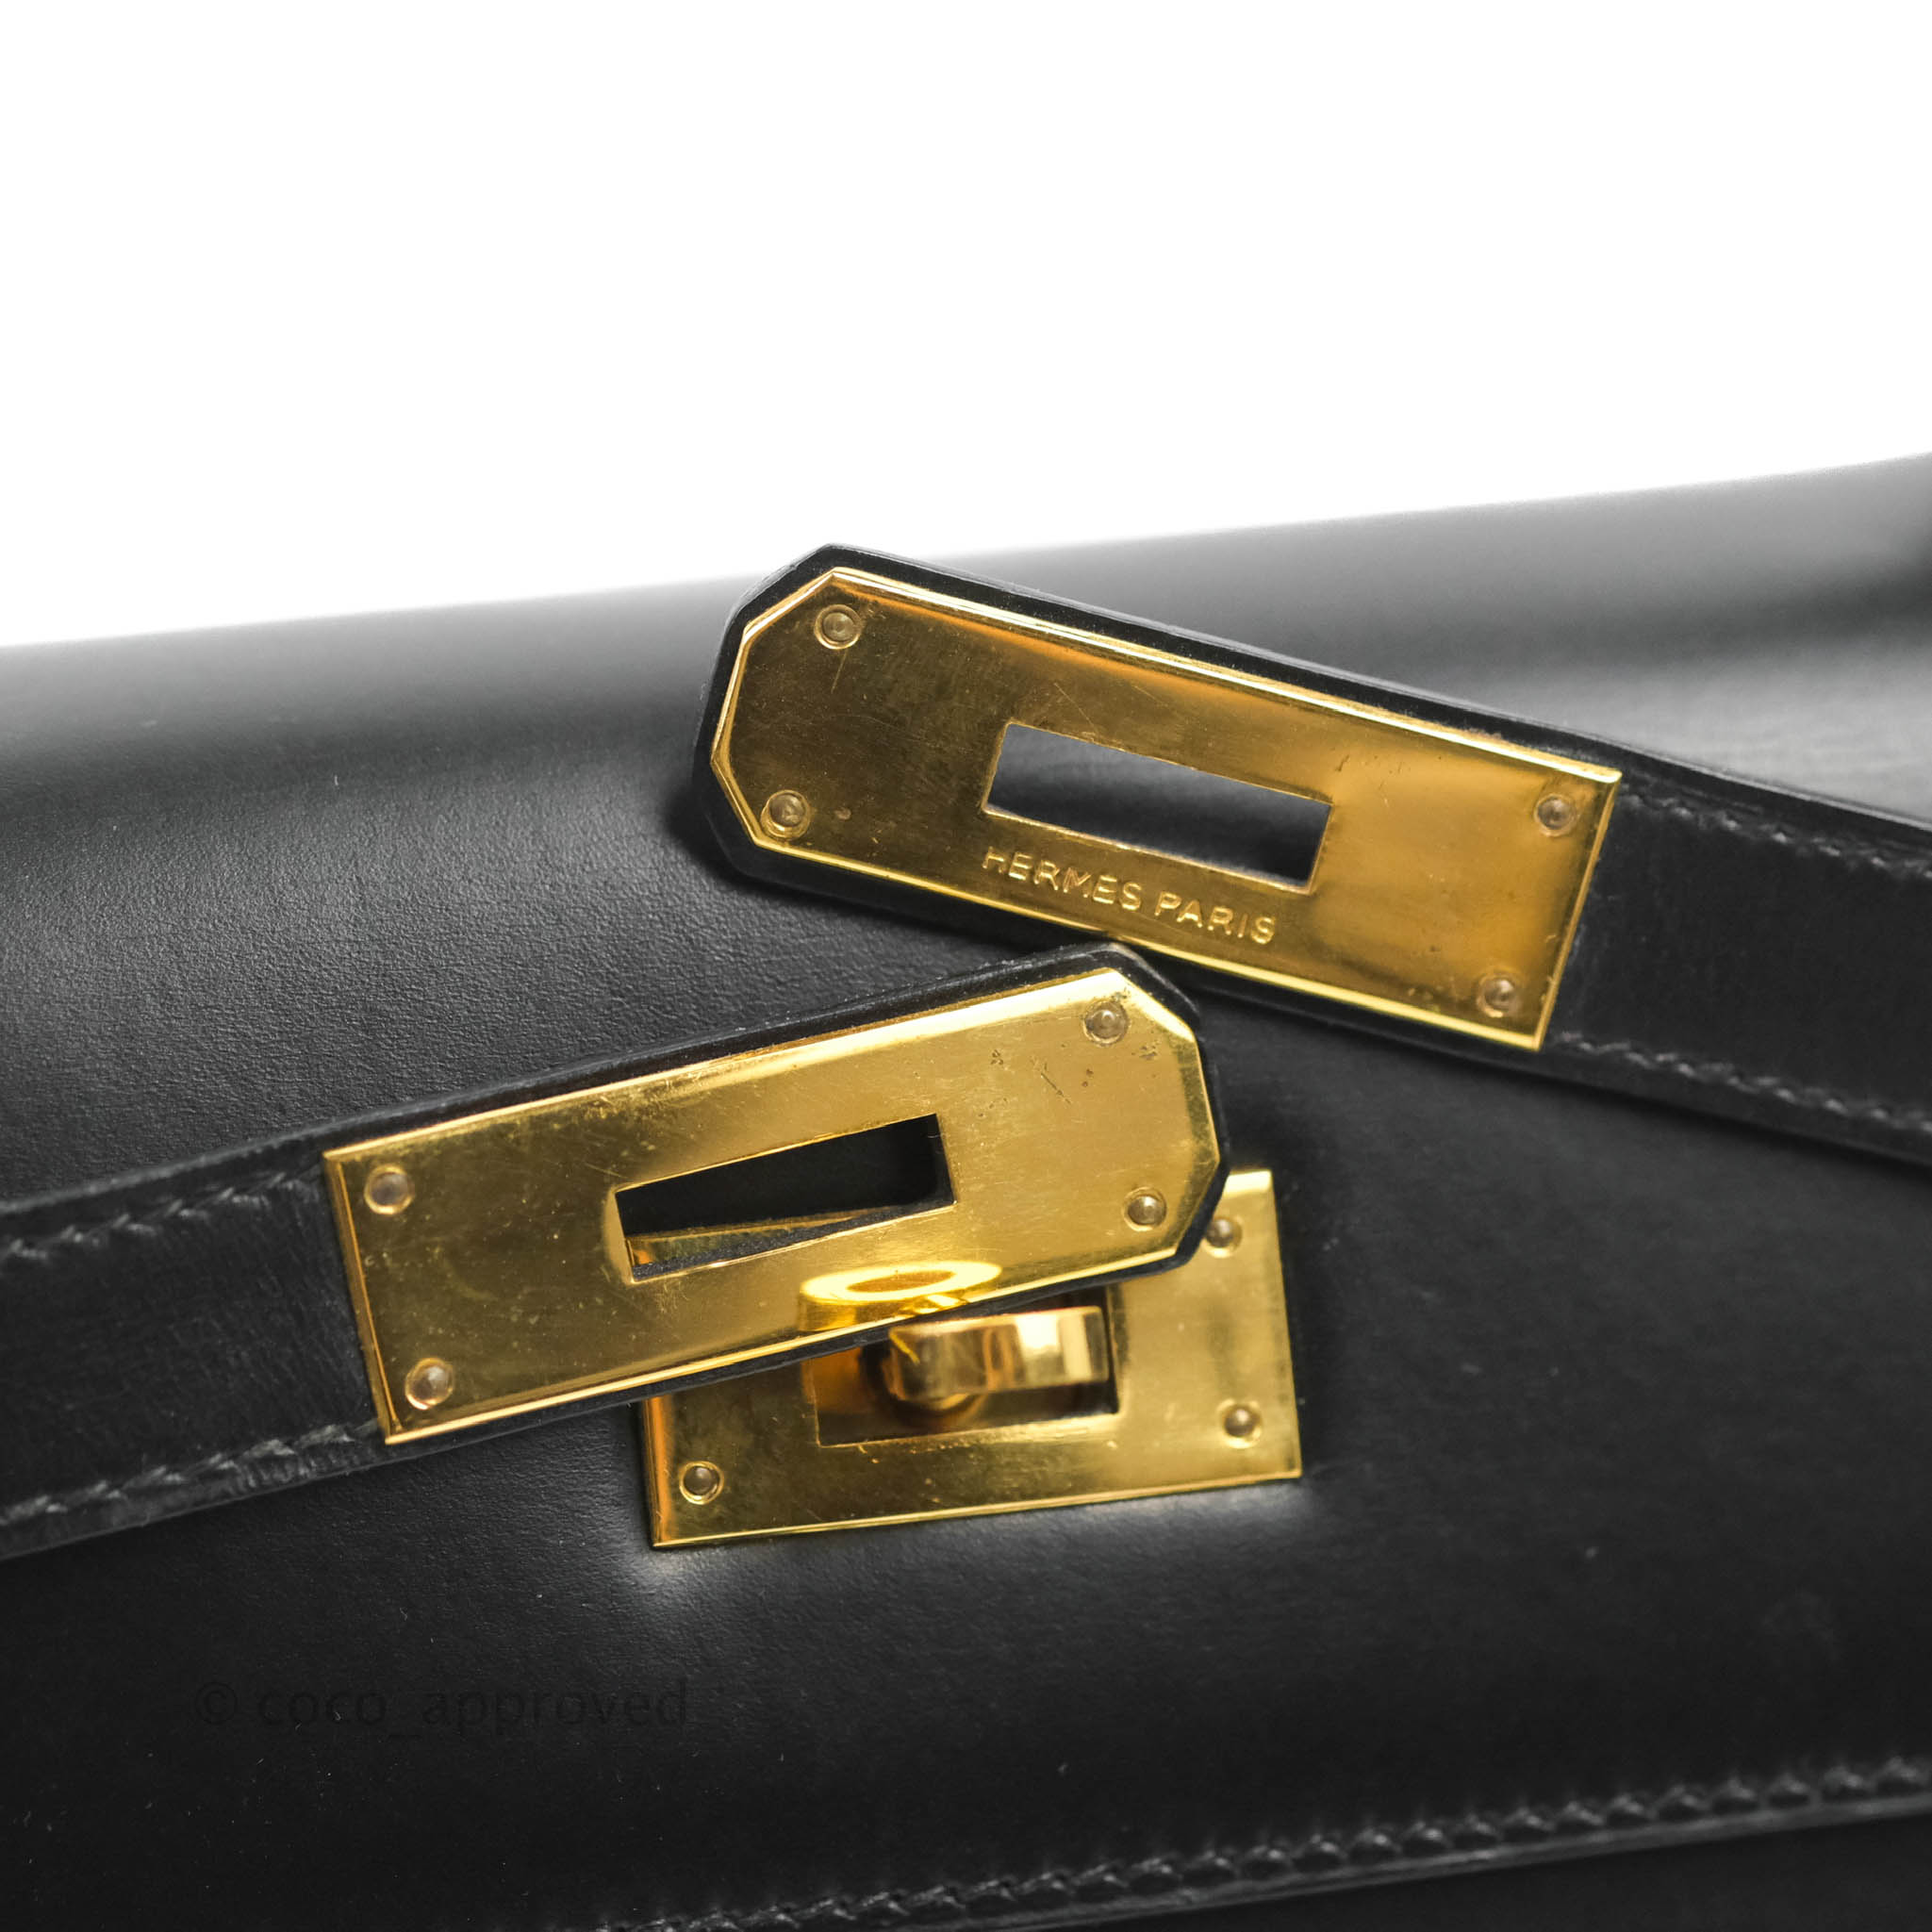 Hermes Kelly 28 Sellier Box Leather Black with Gold Hardware